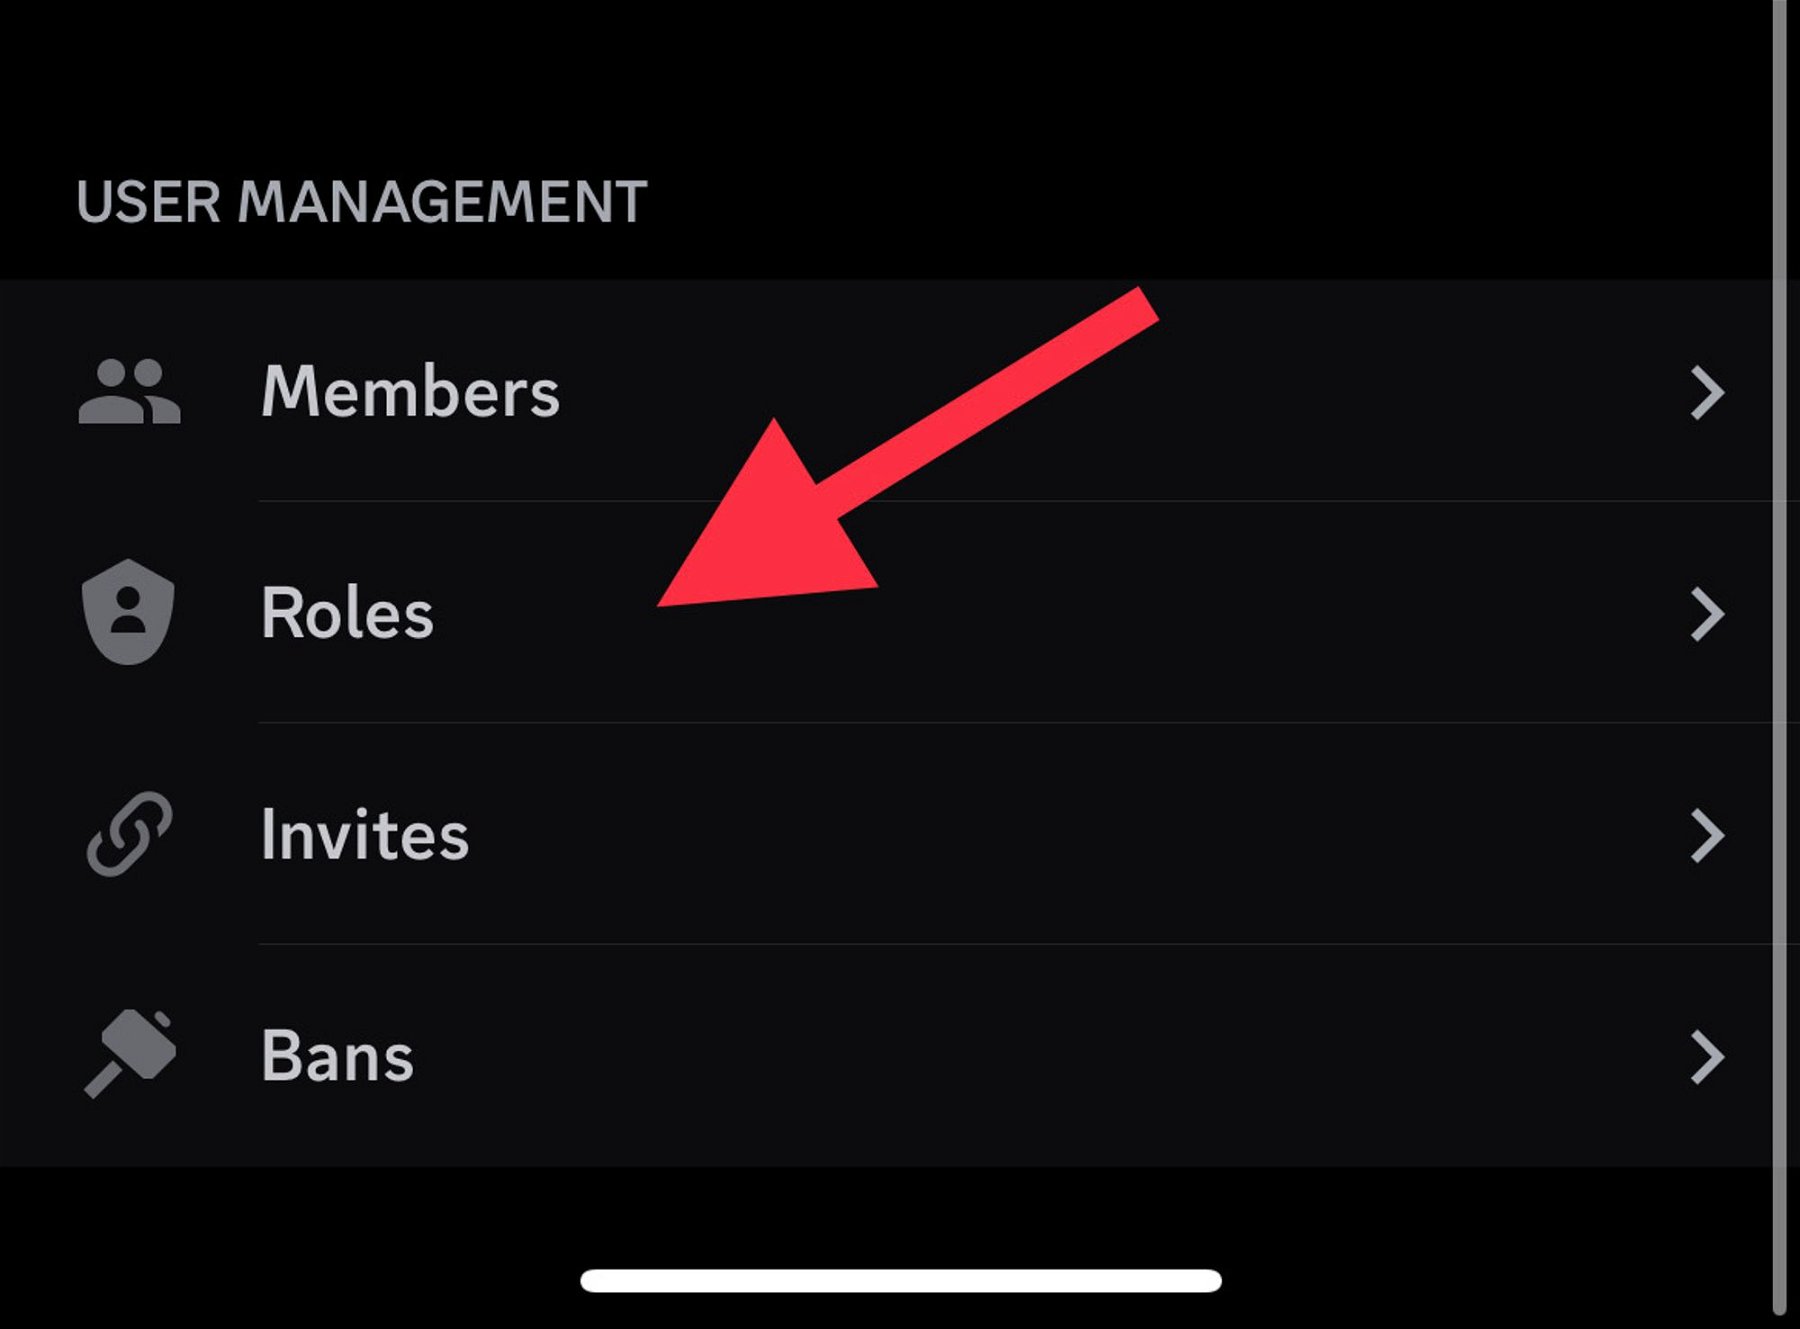 How to Add, Manage and Delete Roles in Discord